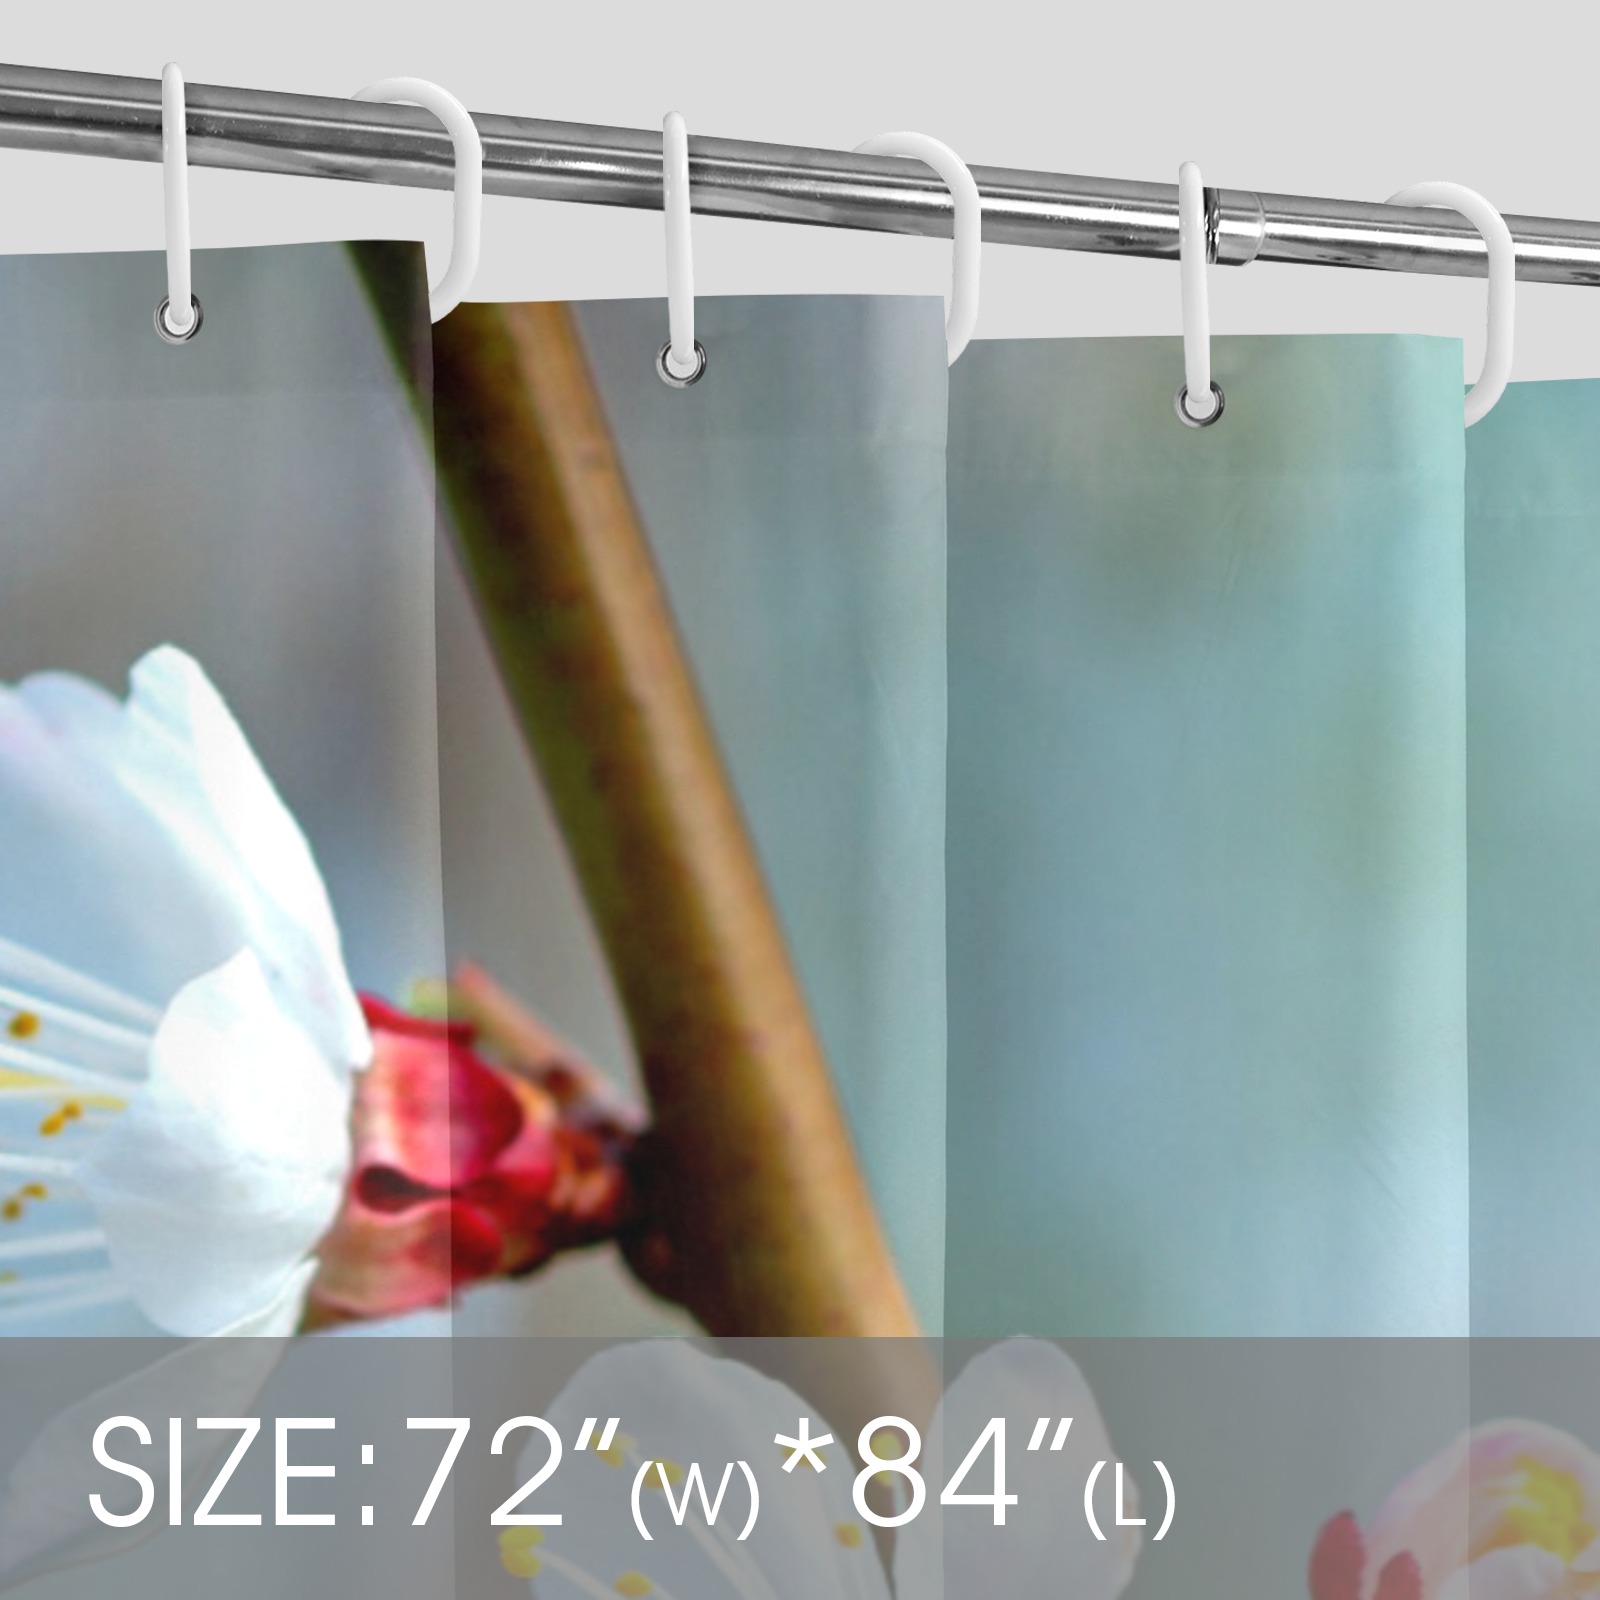 Stunning beauty of white Japanese apricot flowers. Shower Curtain 72"x84"